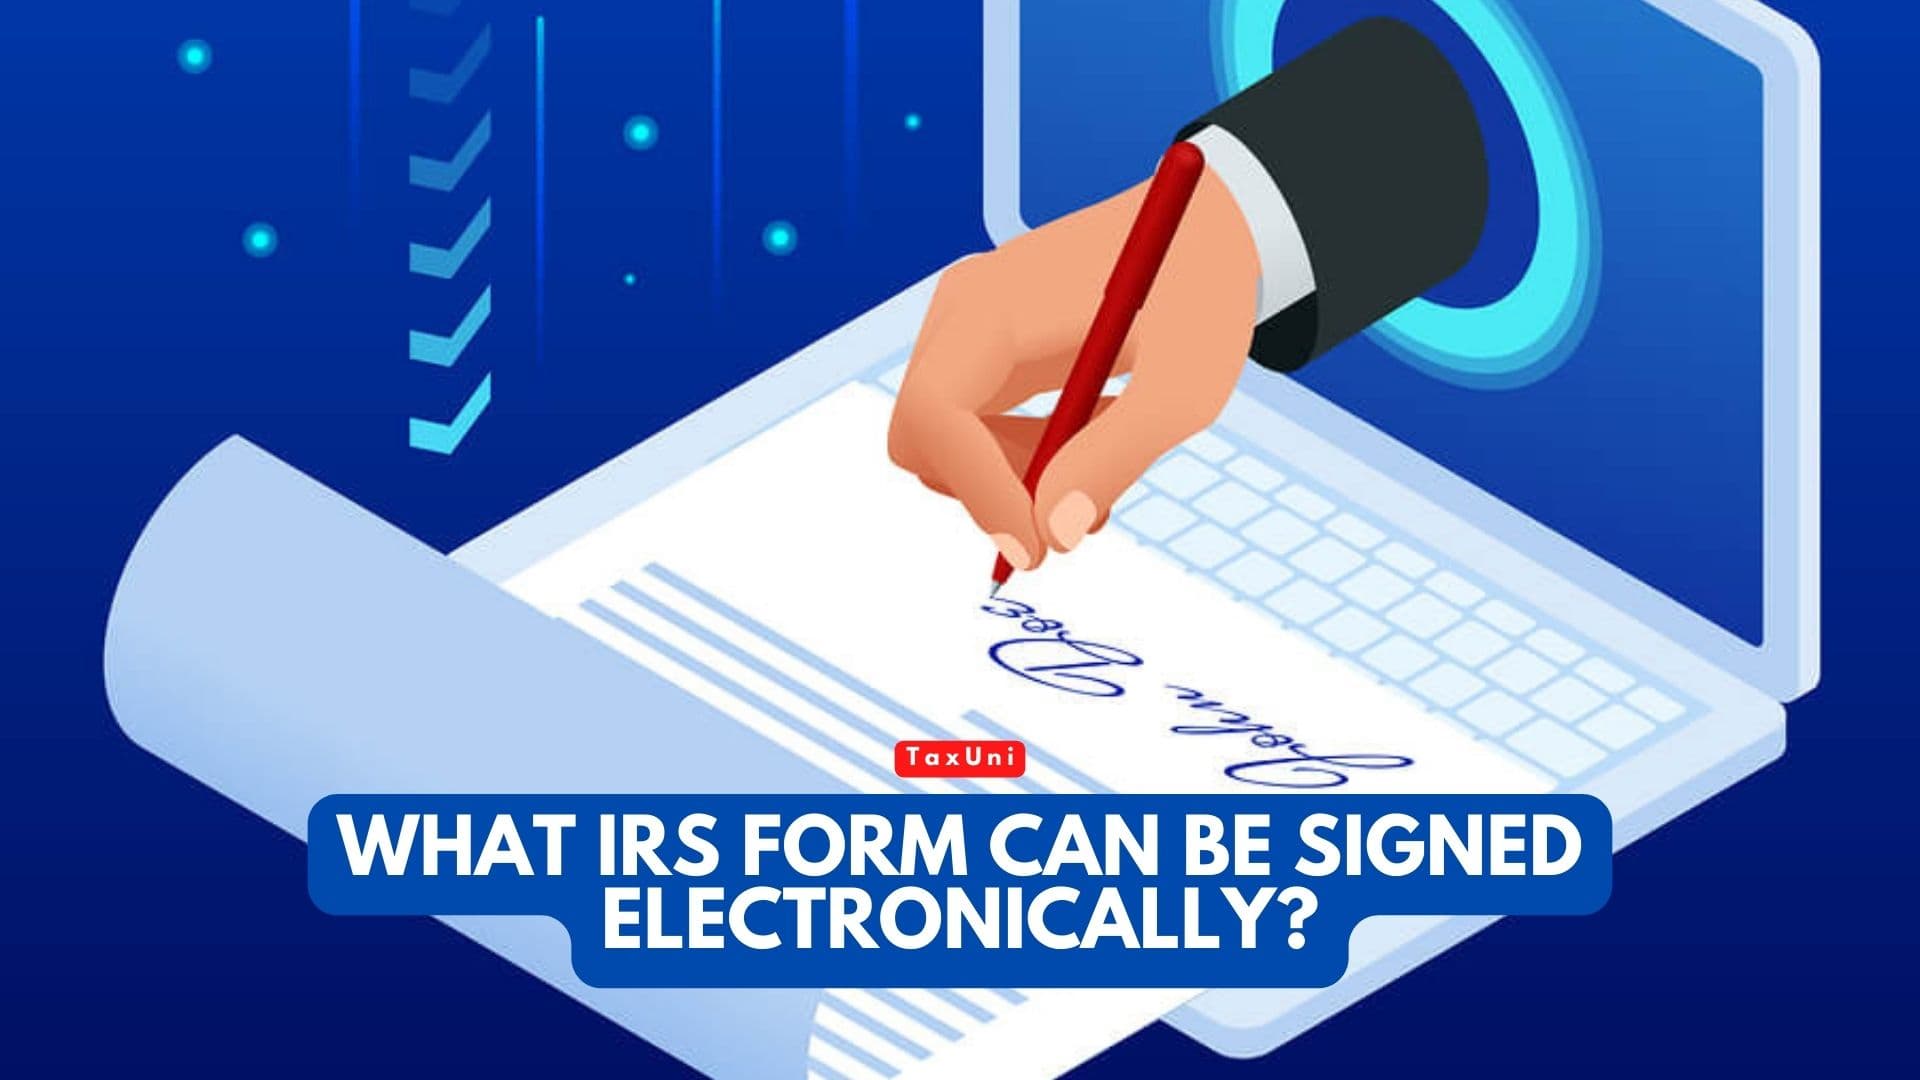 What IRS Form Can Be Signed Electronically?